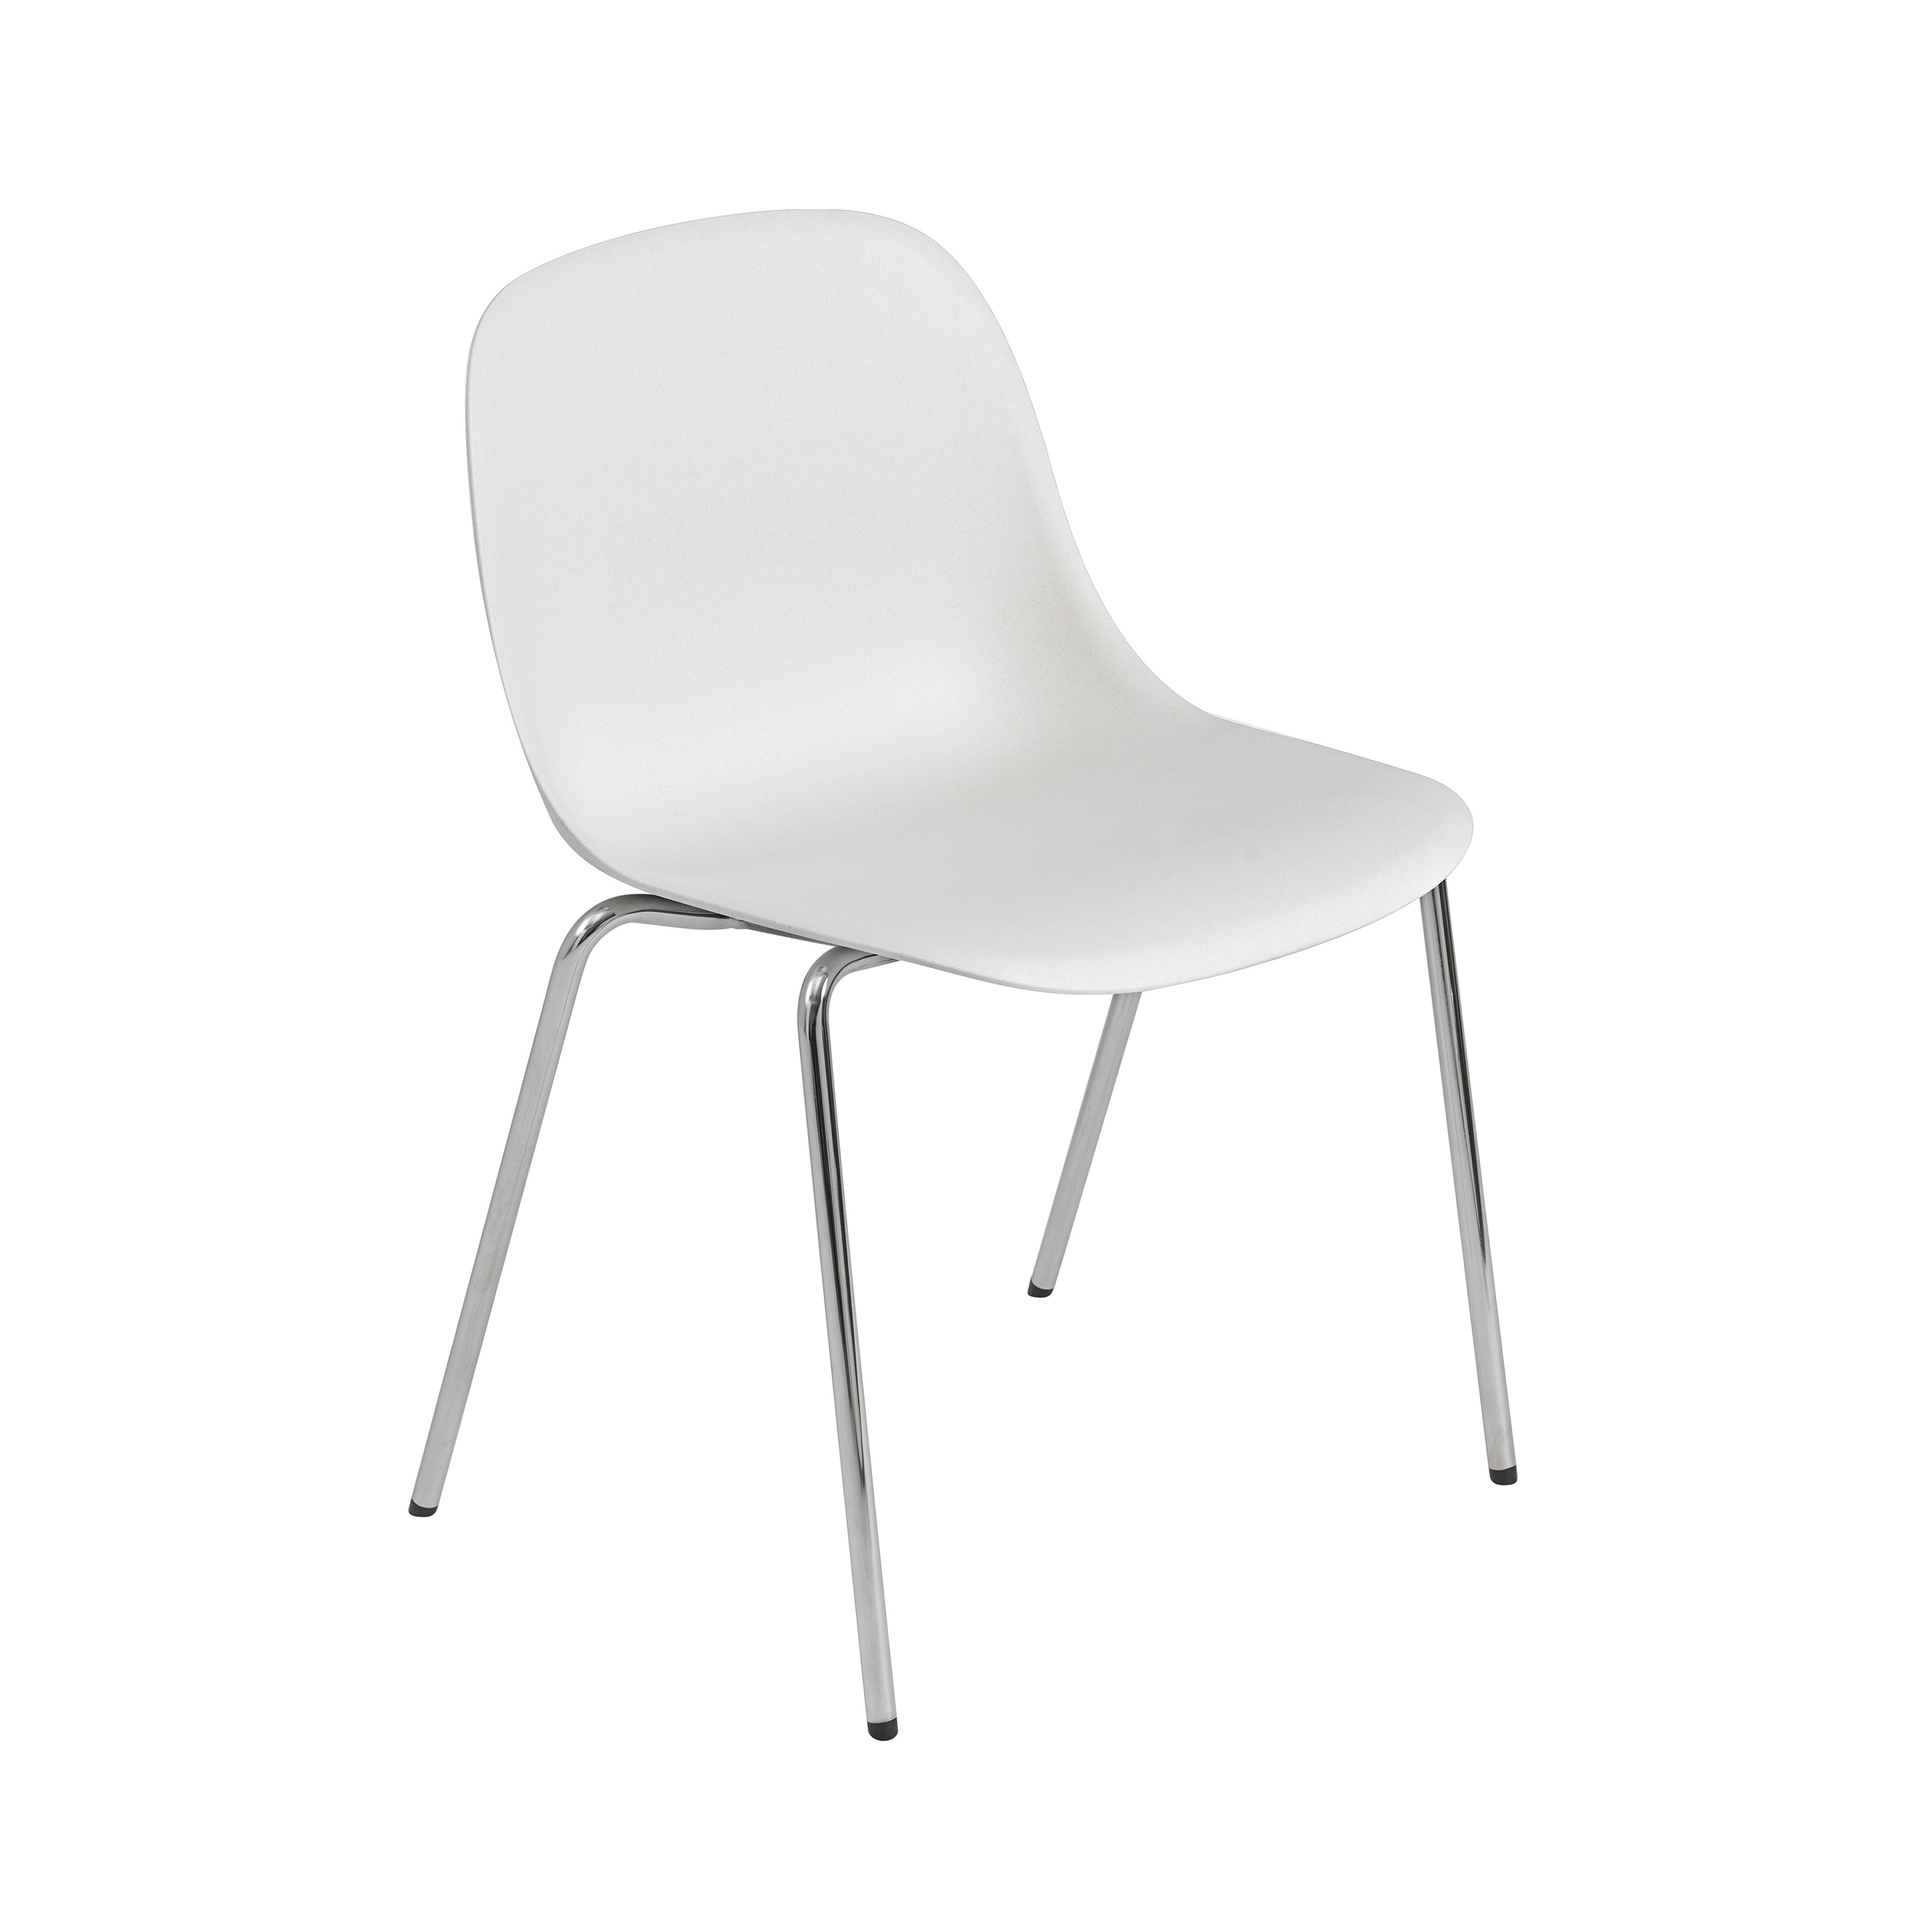 Fiber Side Chair: A-Base with Glides + Natural White